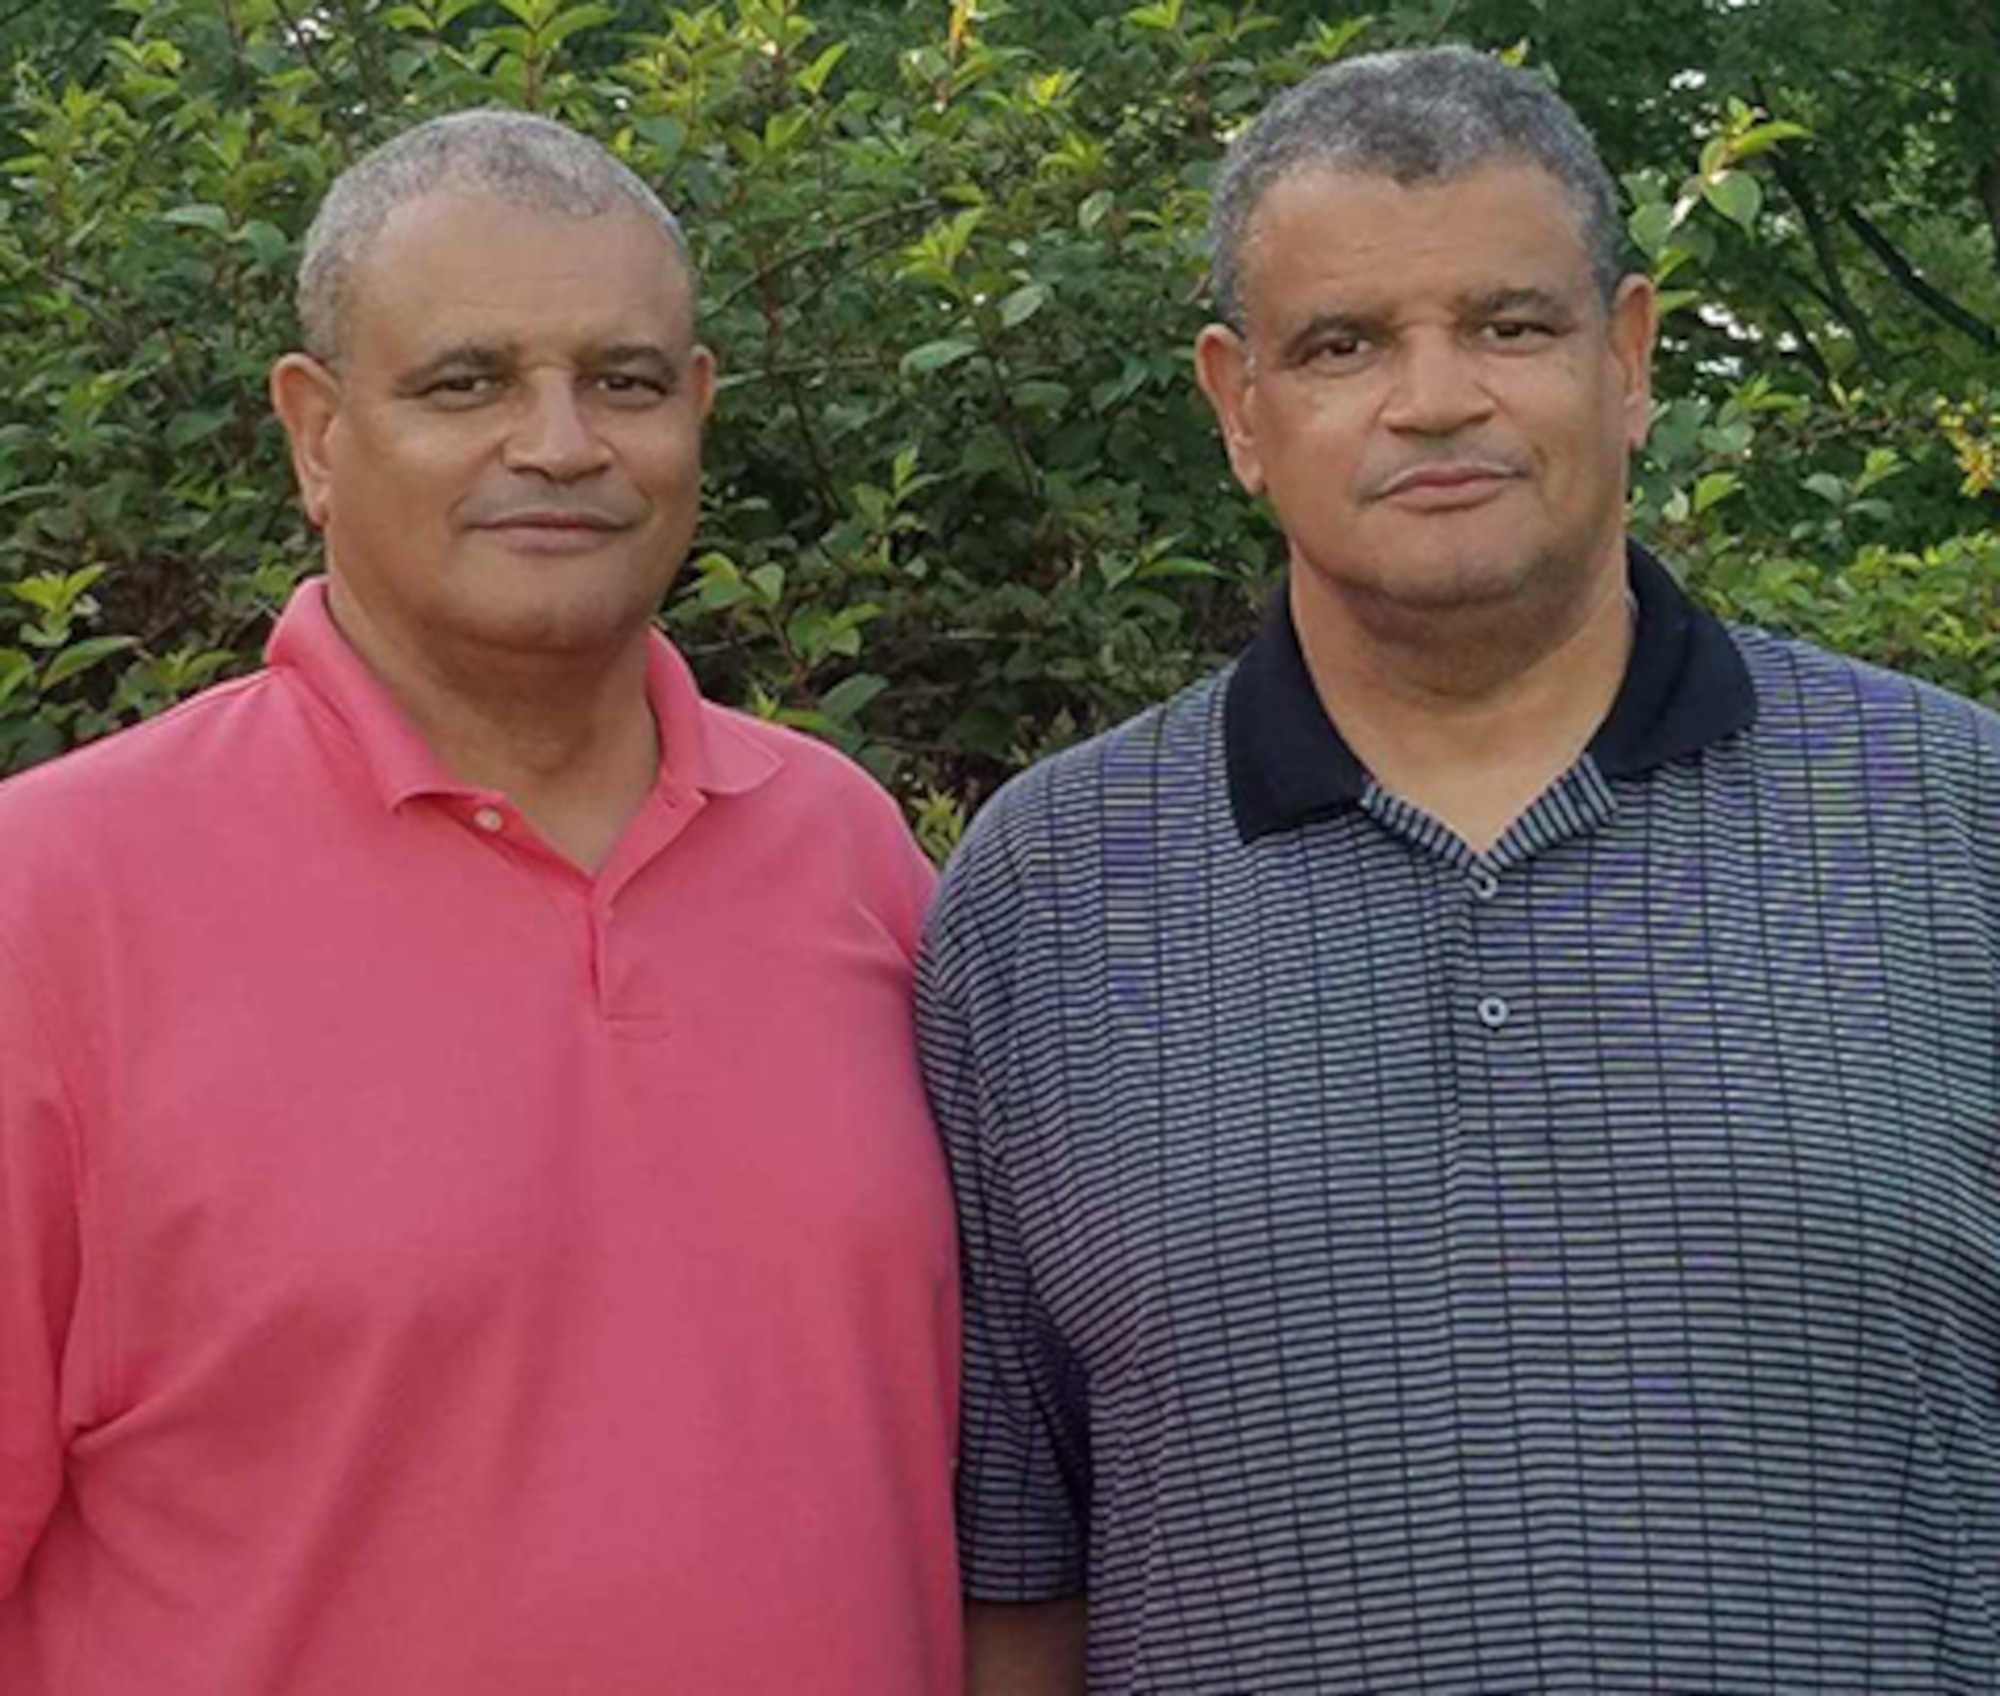 Melvin and Kelvin Bowen pose for a picture together in 2019. The Bowen brothers now live miles part. Kelvin lives in Louisiana currently working at Air Force Global Strike Command and Melvin is living in Nebraska working at U.S. Strategic Command. (Courtesy photo by Kelvin Bowen)